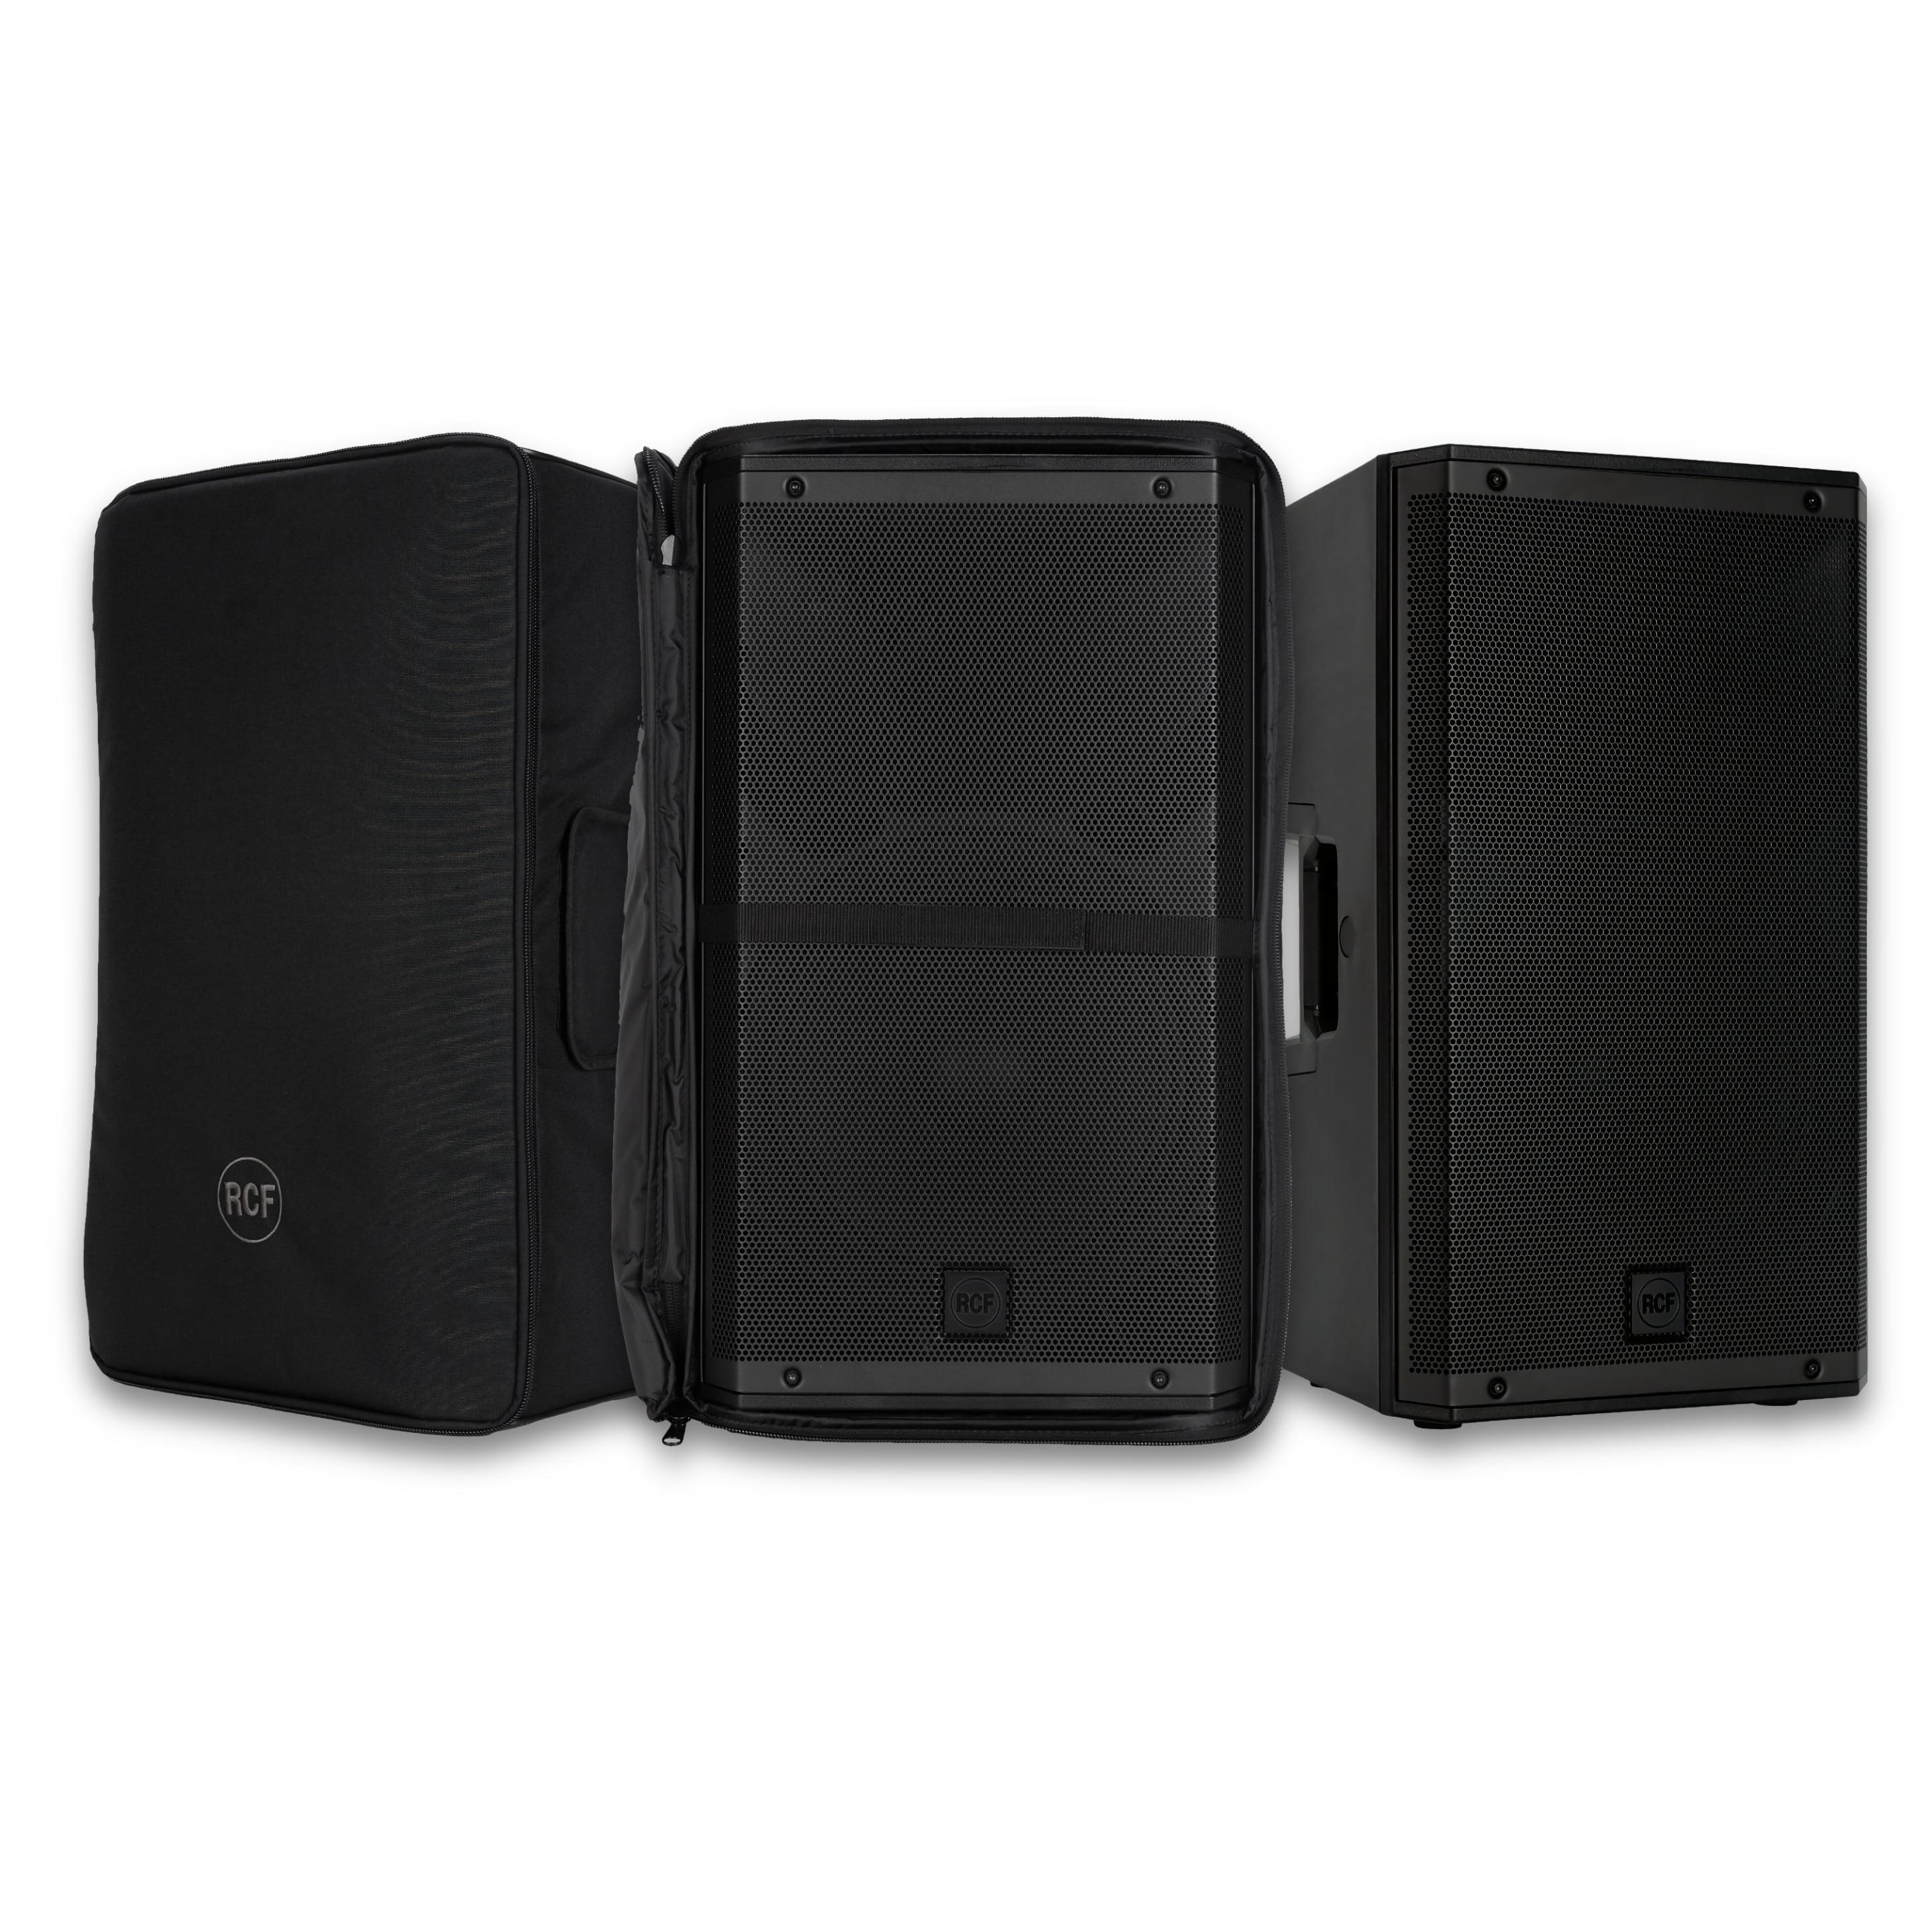 RCF ART 912-A Professional Active Speakers & Covers